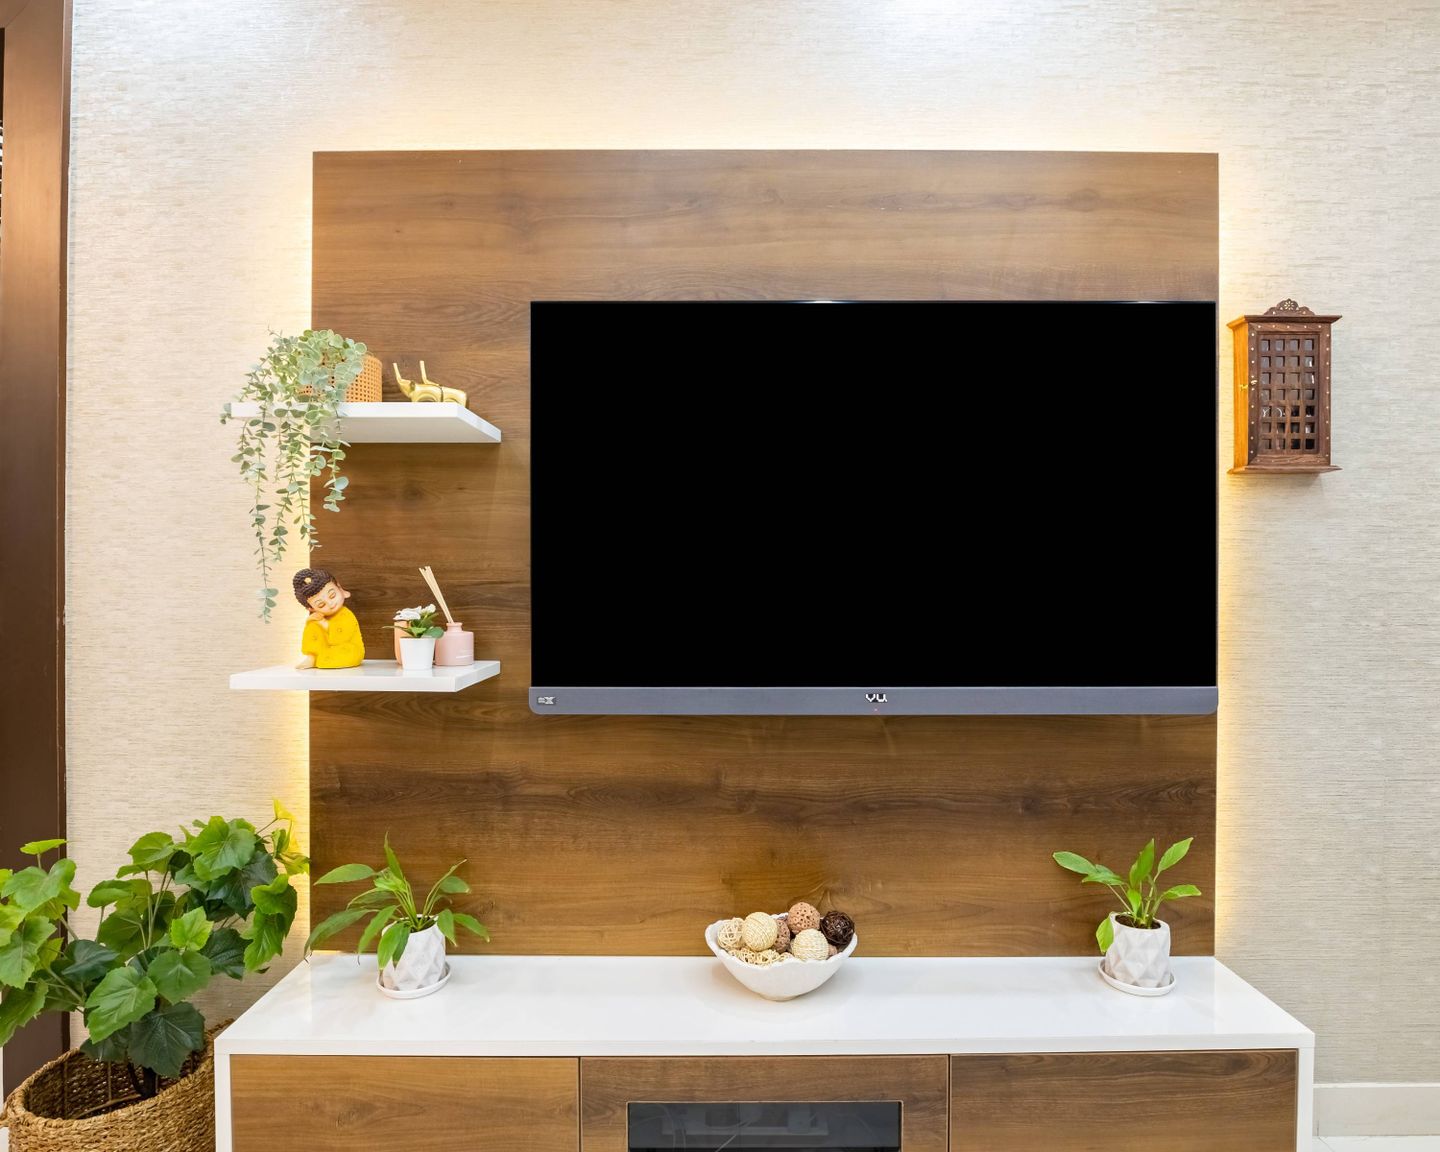 TV Unit With A Wooden Laminate Finish - Livspace